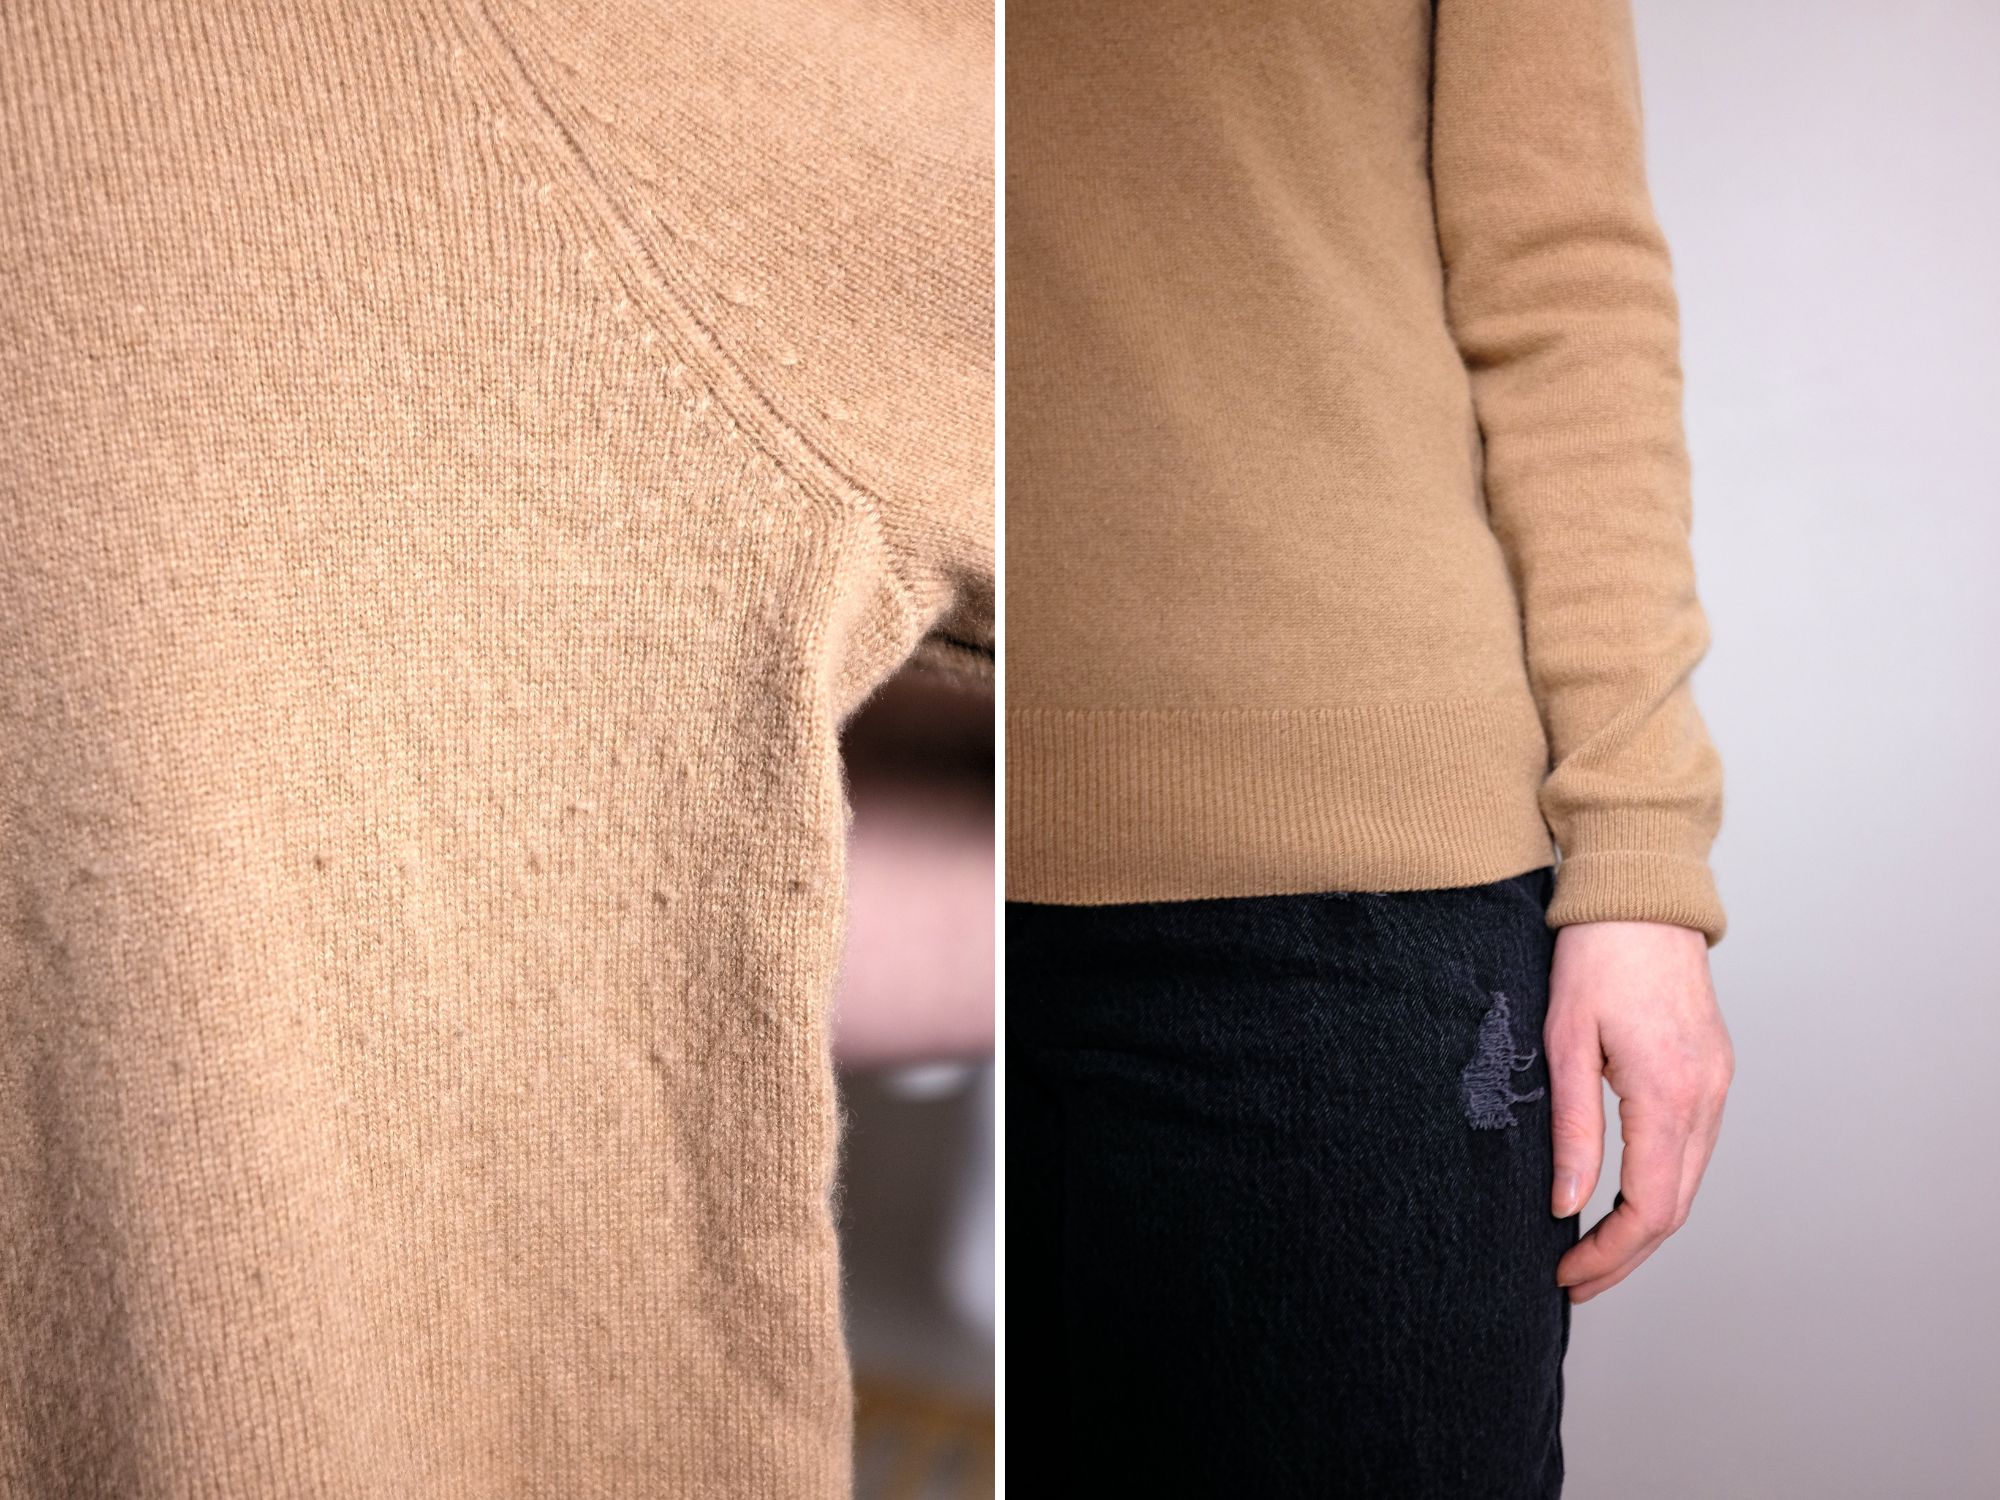 Alyssa shows pilling on the cashmere sweater, and the untucked length